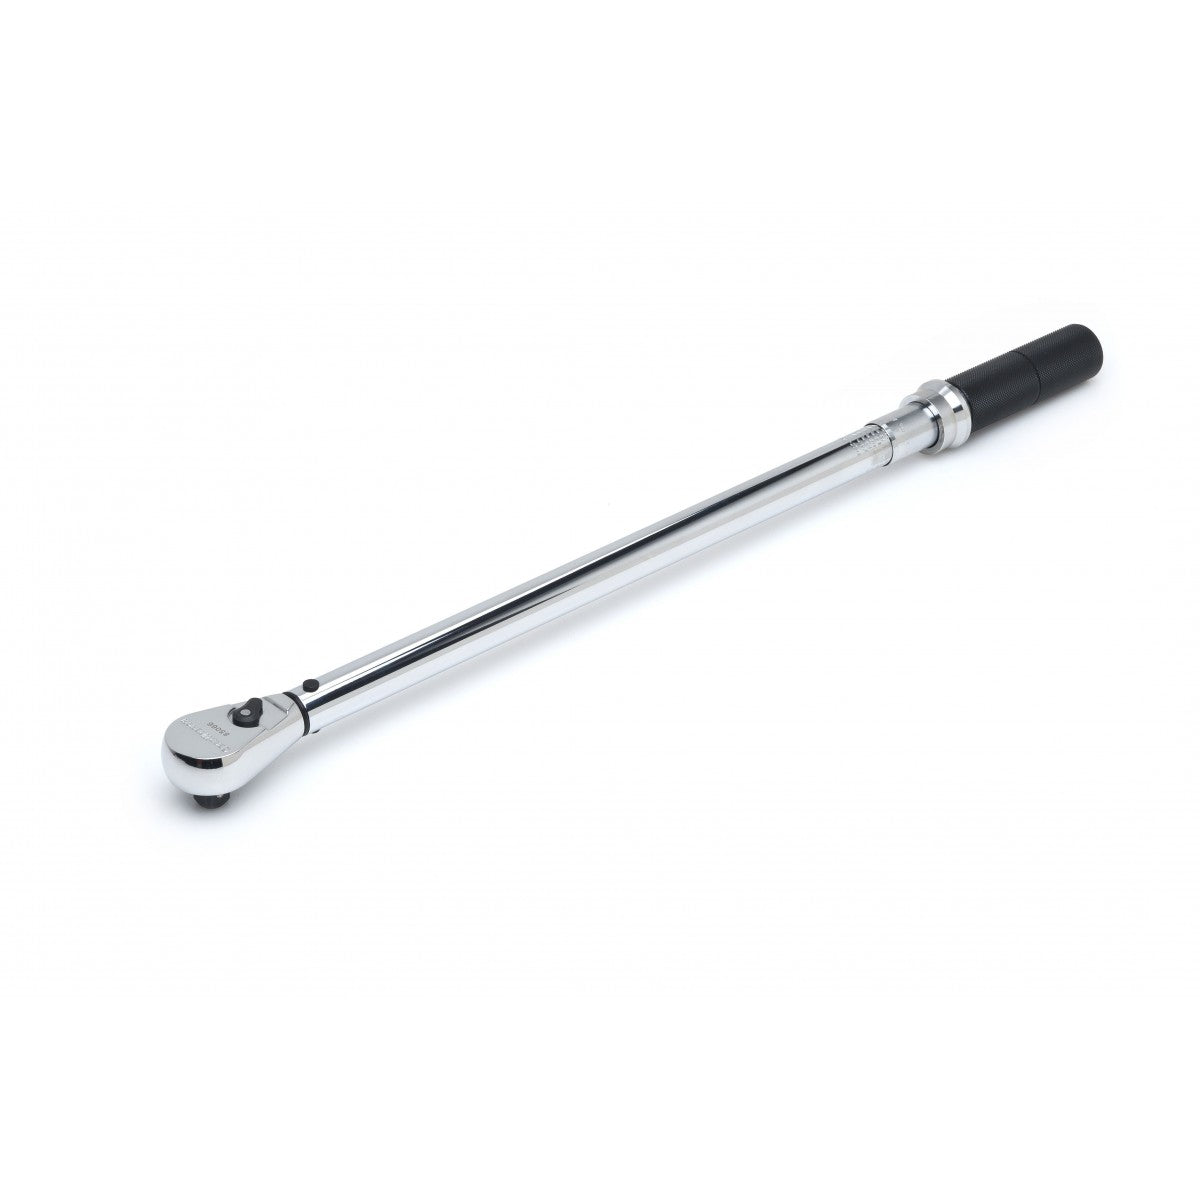 1/2" Micrometer Torque Wrench 85066 by Gearwrench